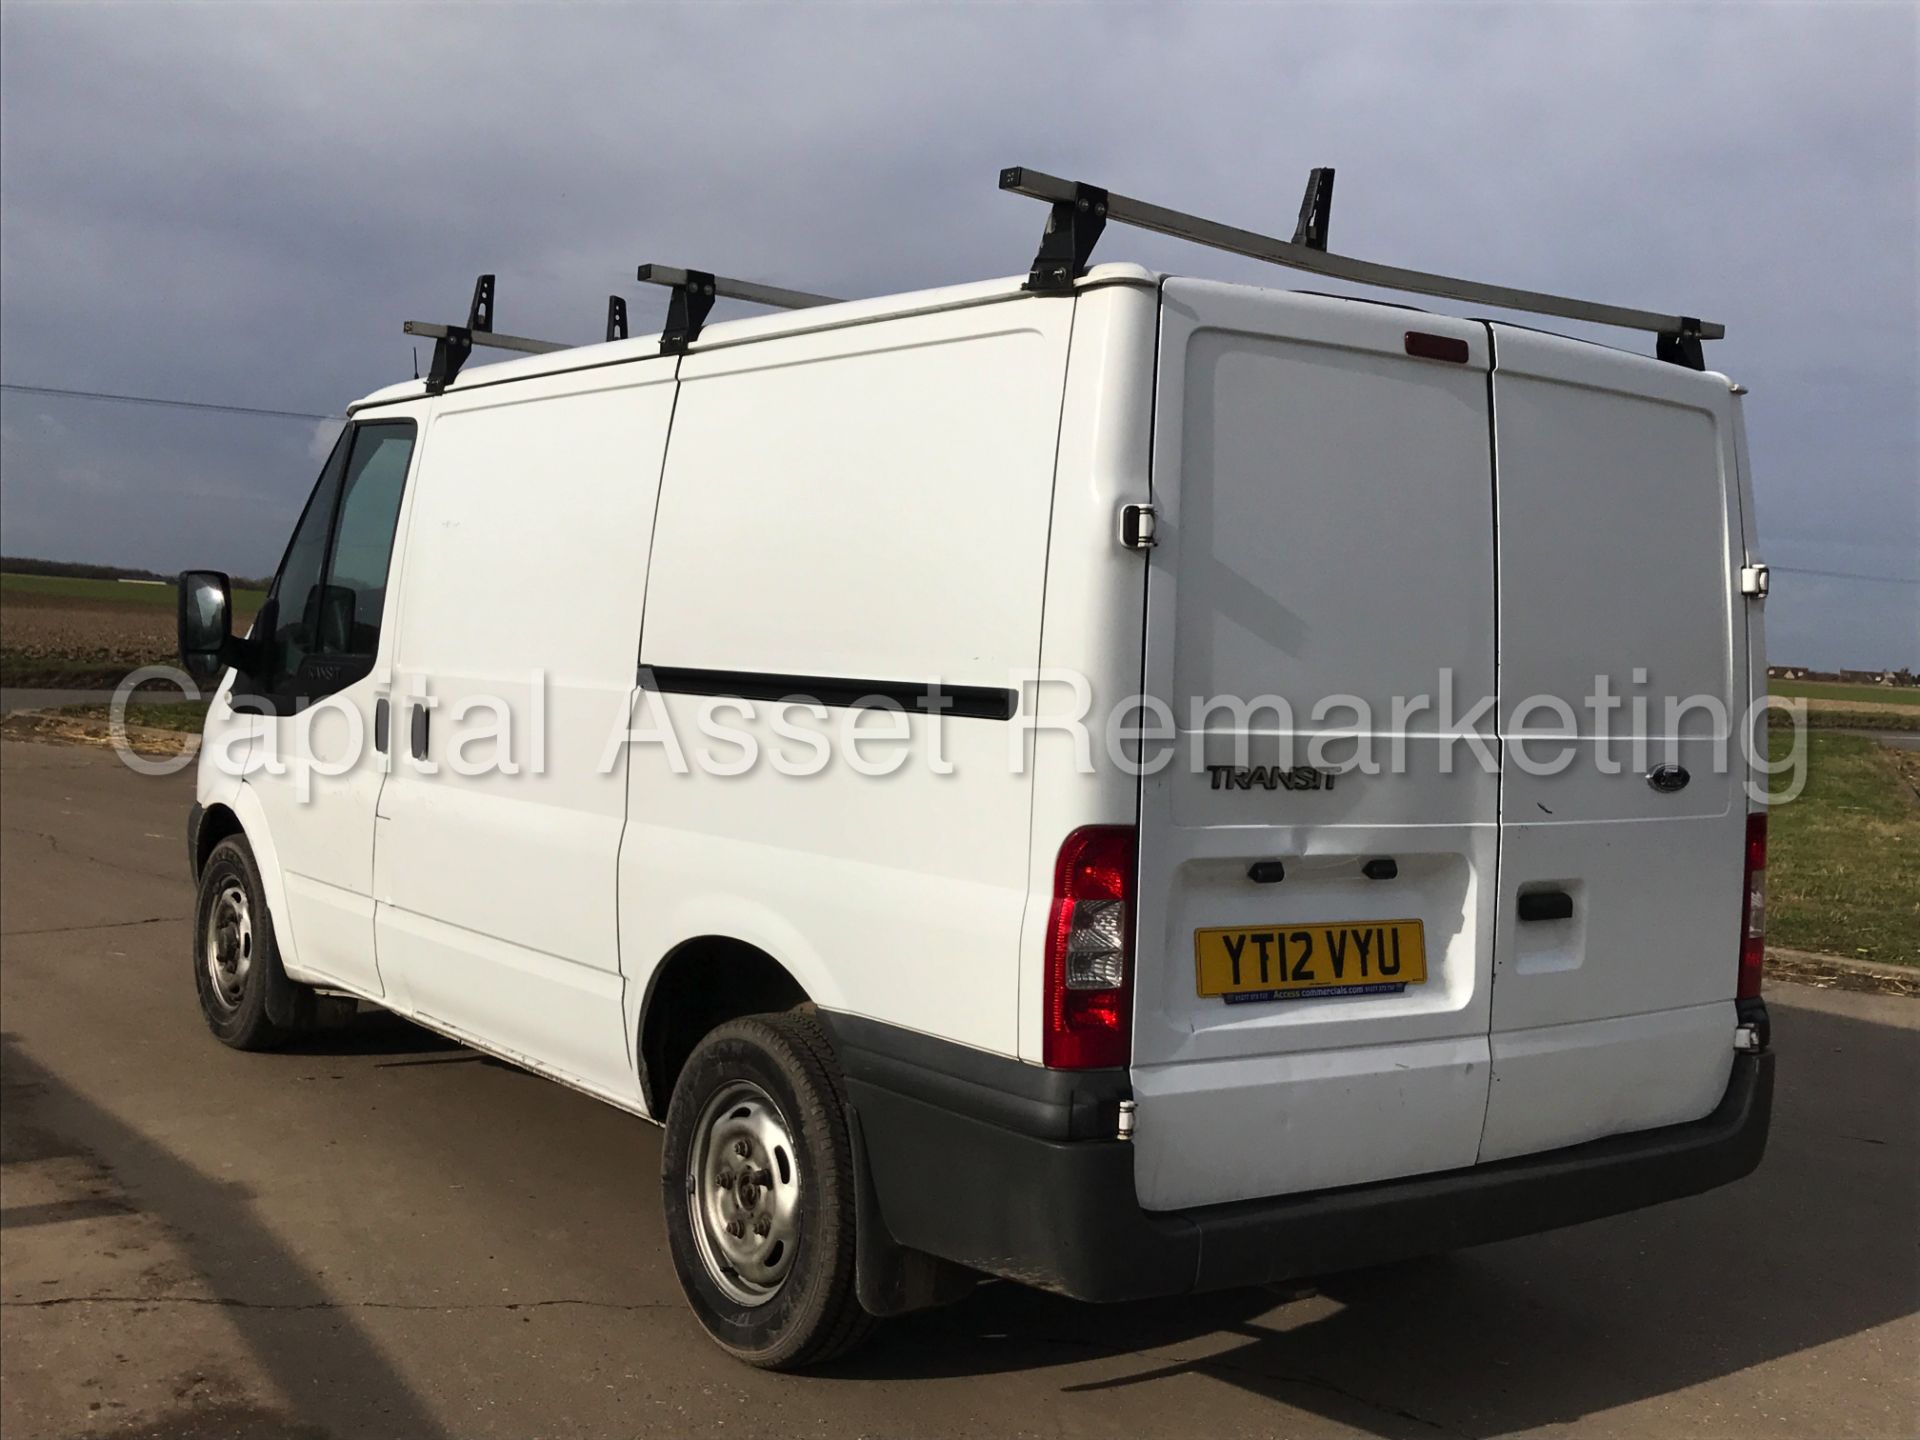 (On Sale) FORD TRANSIT 100 T280 FWD (2012) '2.2 TDCI - SWB - 100 PS - 6 SPEED' (1 FORMER KEEPER) - Image 6 of 19